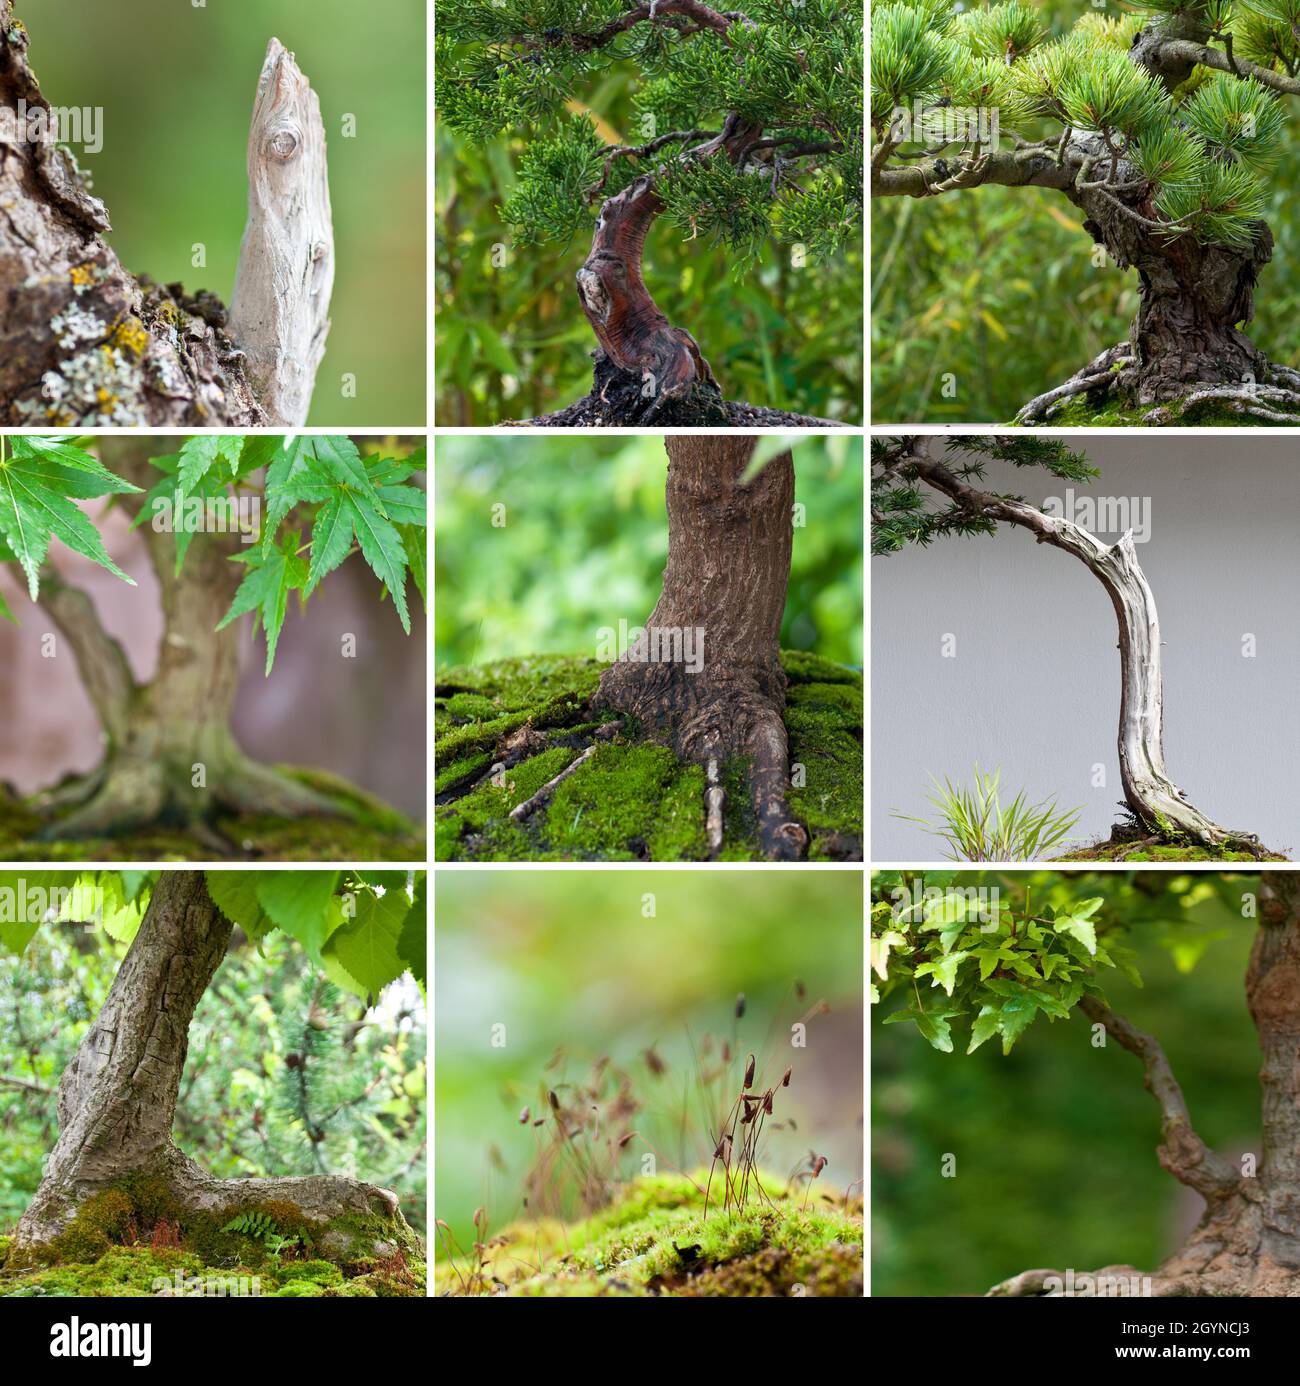 Collage with various bonsai trees Stock Photo